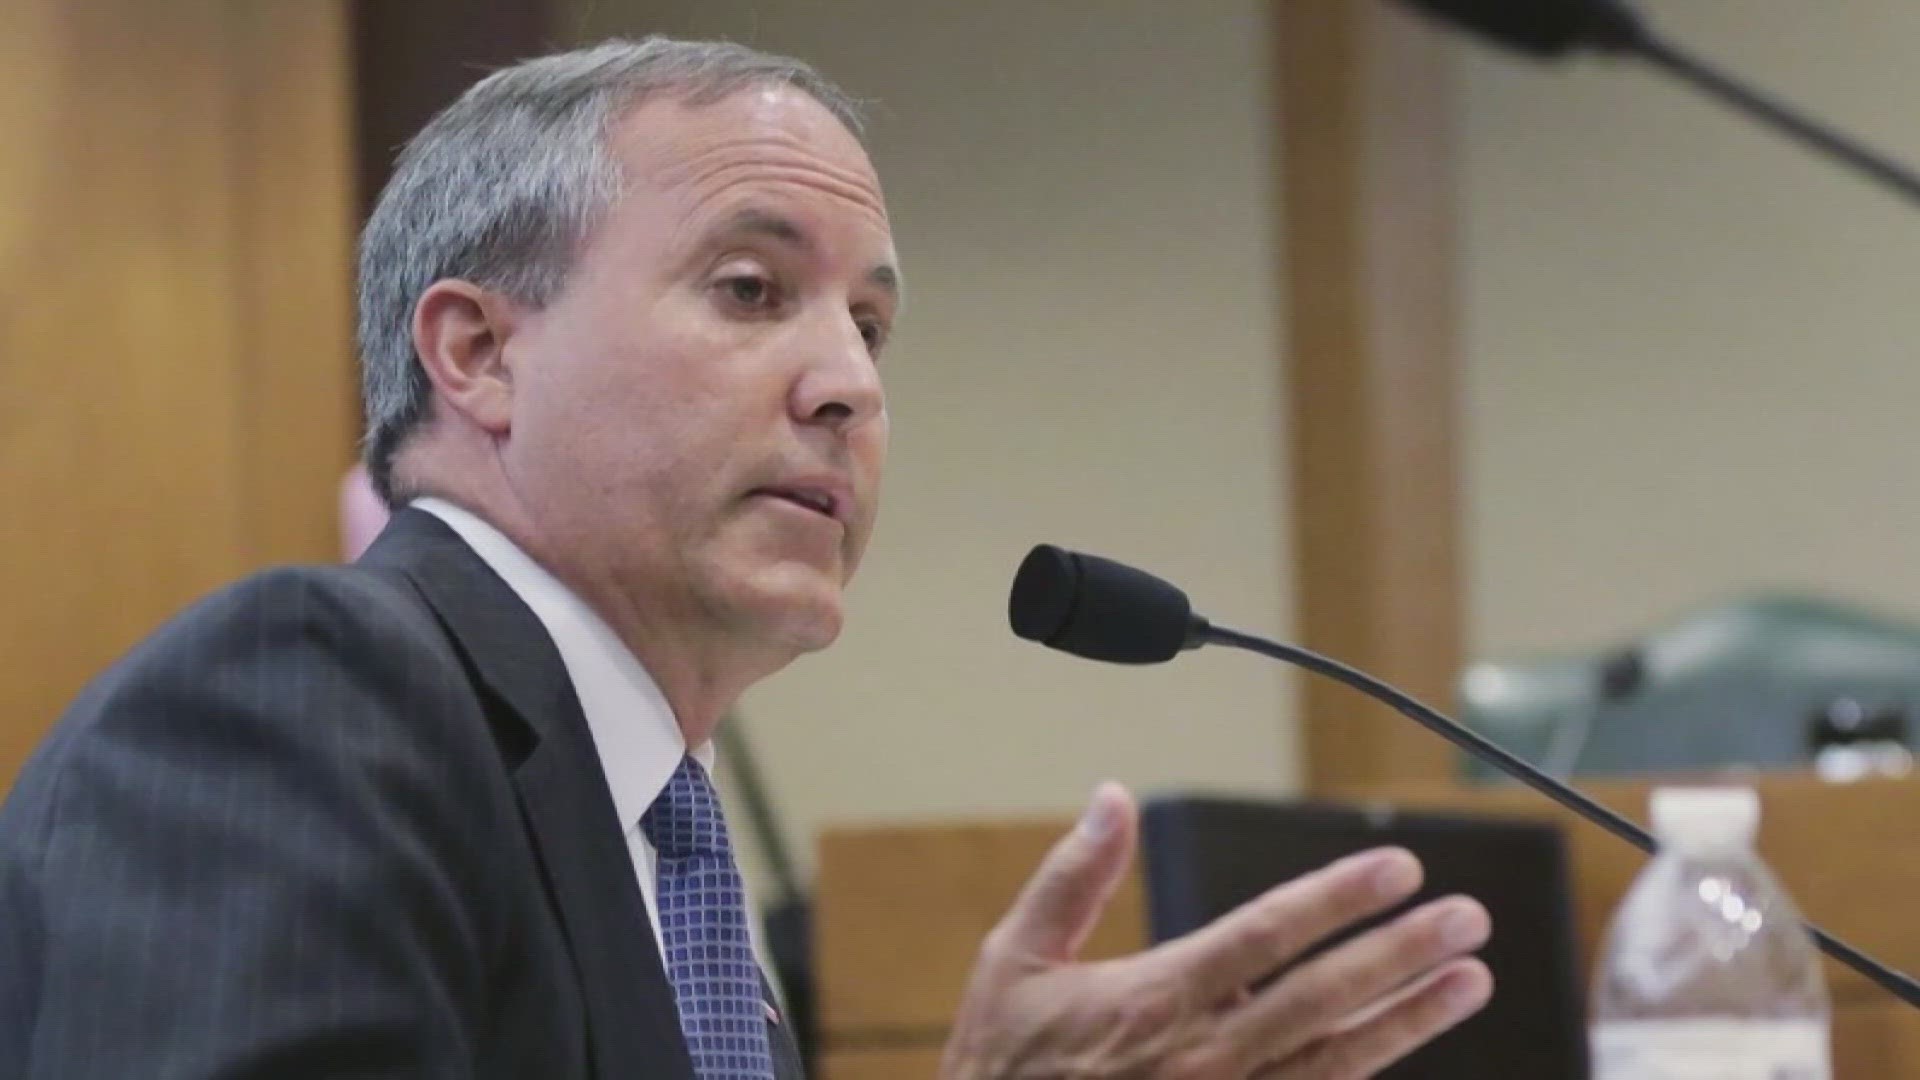 We're about a week out from the start of Ken Paxton's trial. The suspended Texas Attorney General is now dismissing reports of a possible resignation.